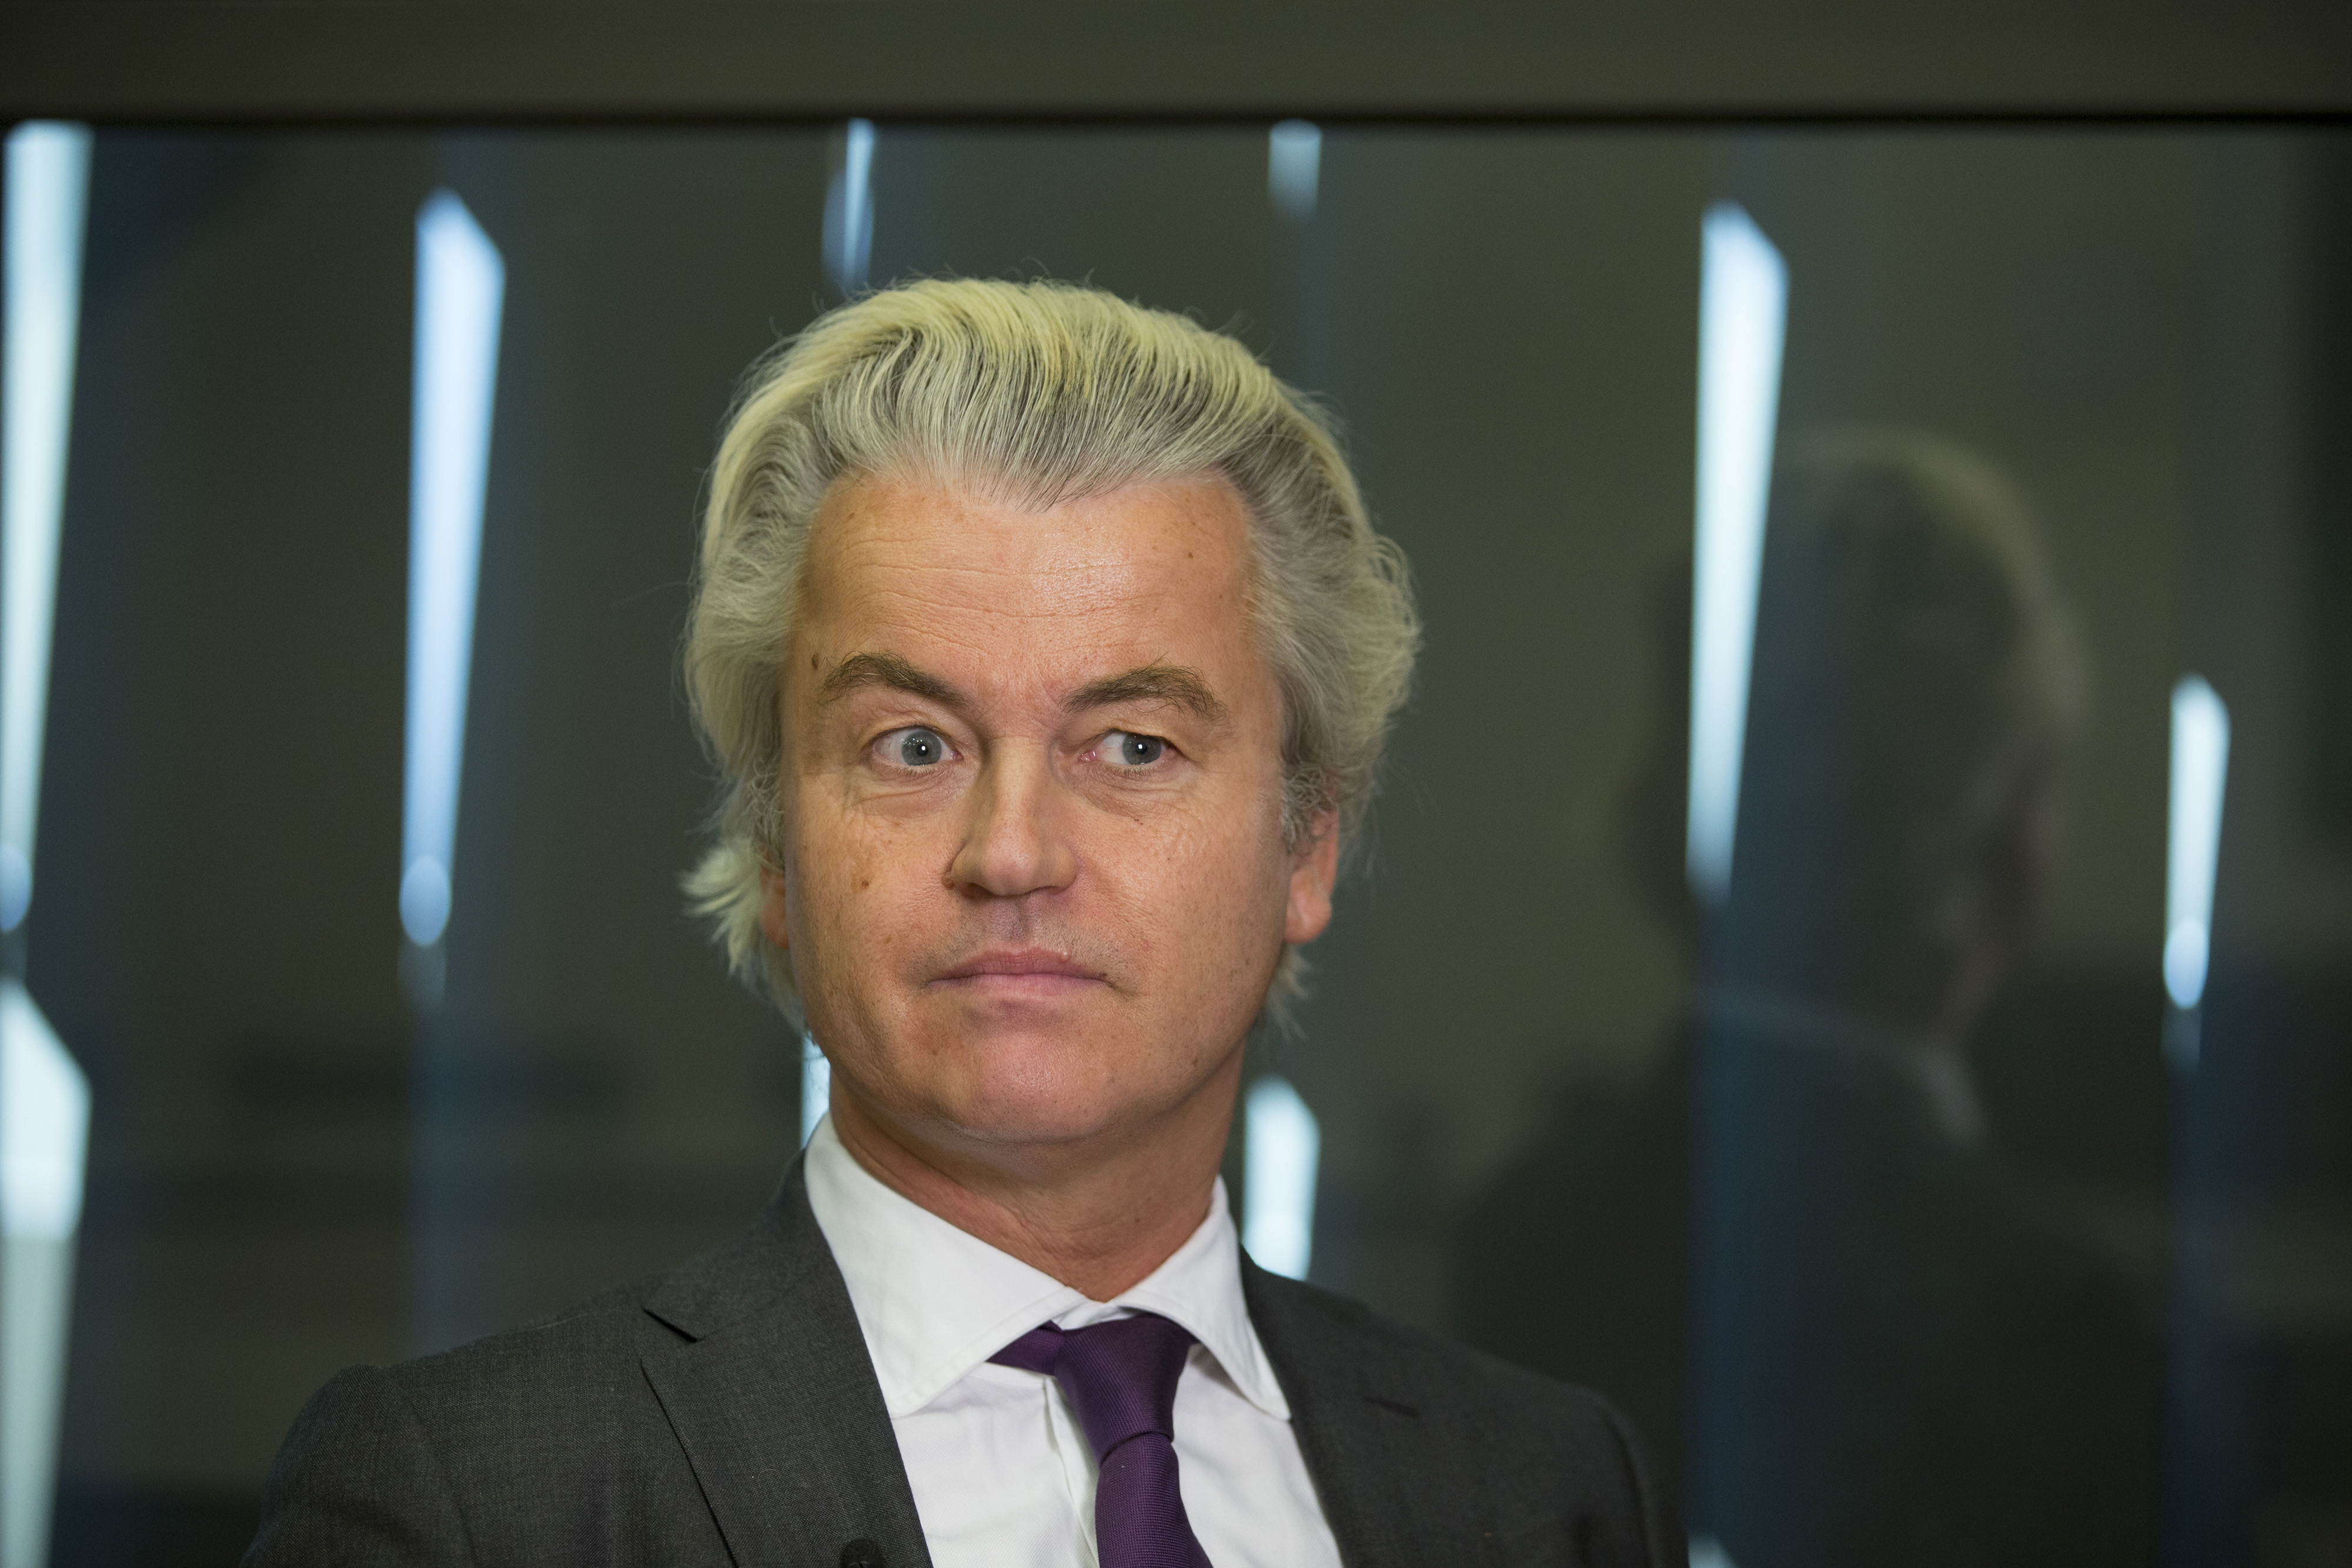 Geert Wilders, leader of the Freedom Party, reacts during an interview in The Hague, Netherlands, on Thursday, June 16, 2016.. (Jasper Juinen—Bloomberg via Getty Image)